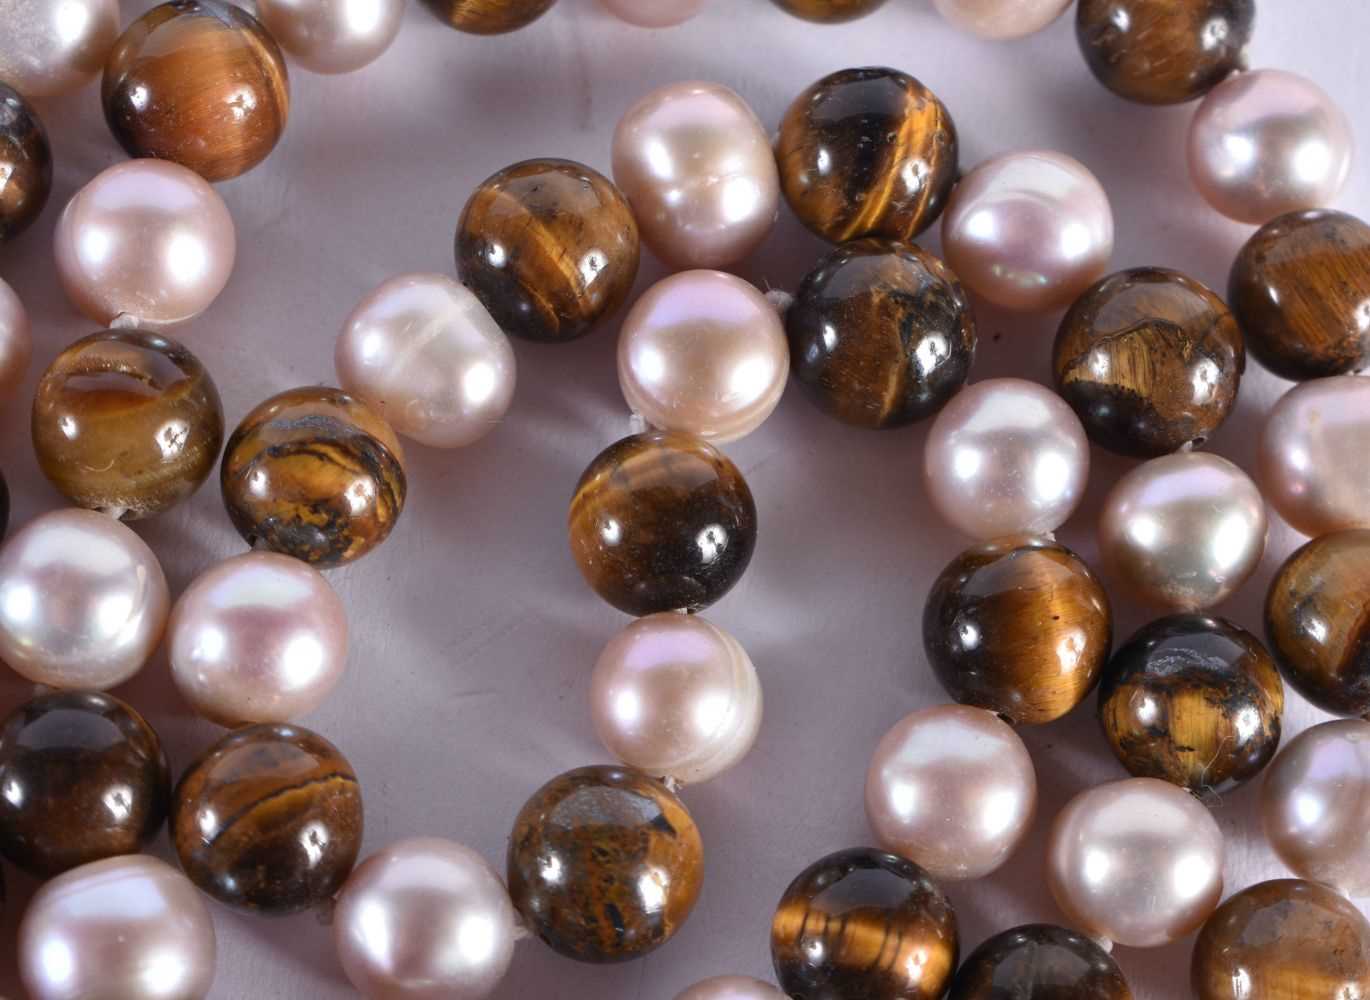 A TIGERS EYE AND PEARL NECKLACE. 113 grams. 124 cm long. - Image 3 of 3